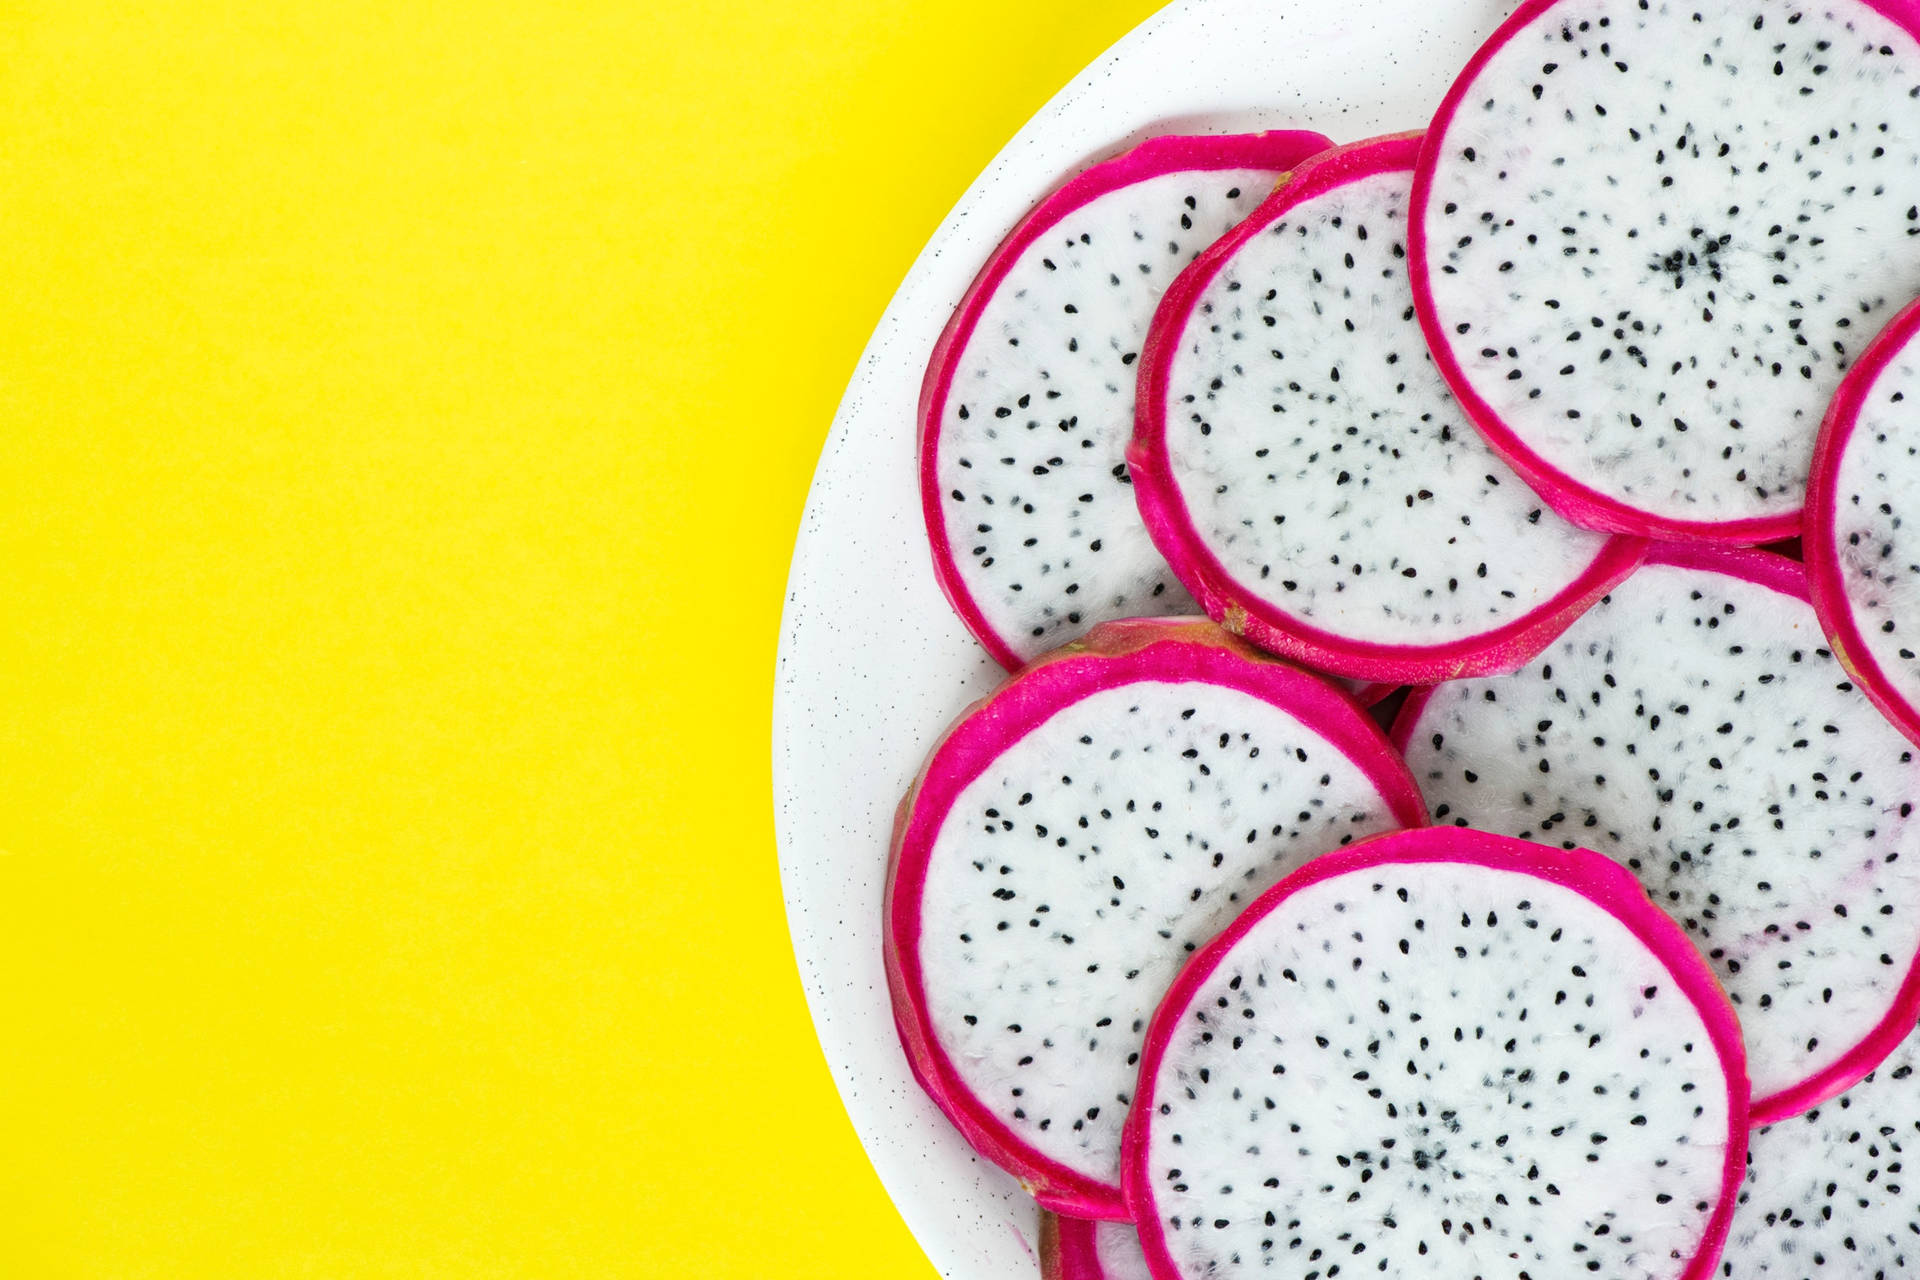 Dragonfruit Plate Fruit Flat Lay Food Photography Wallpaper